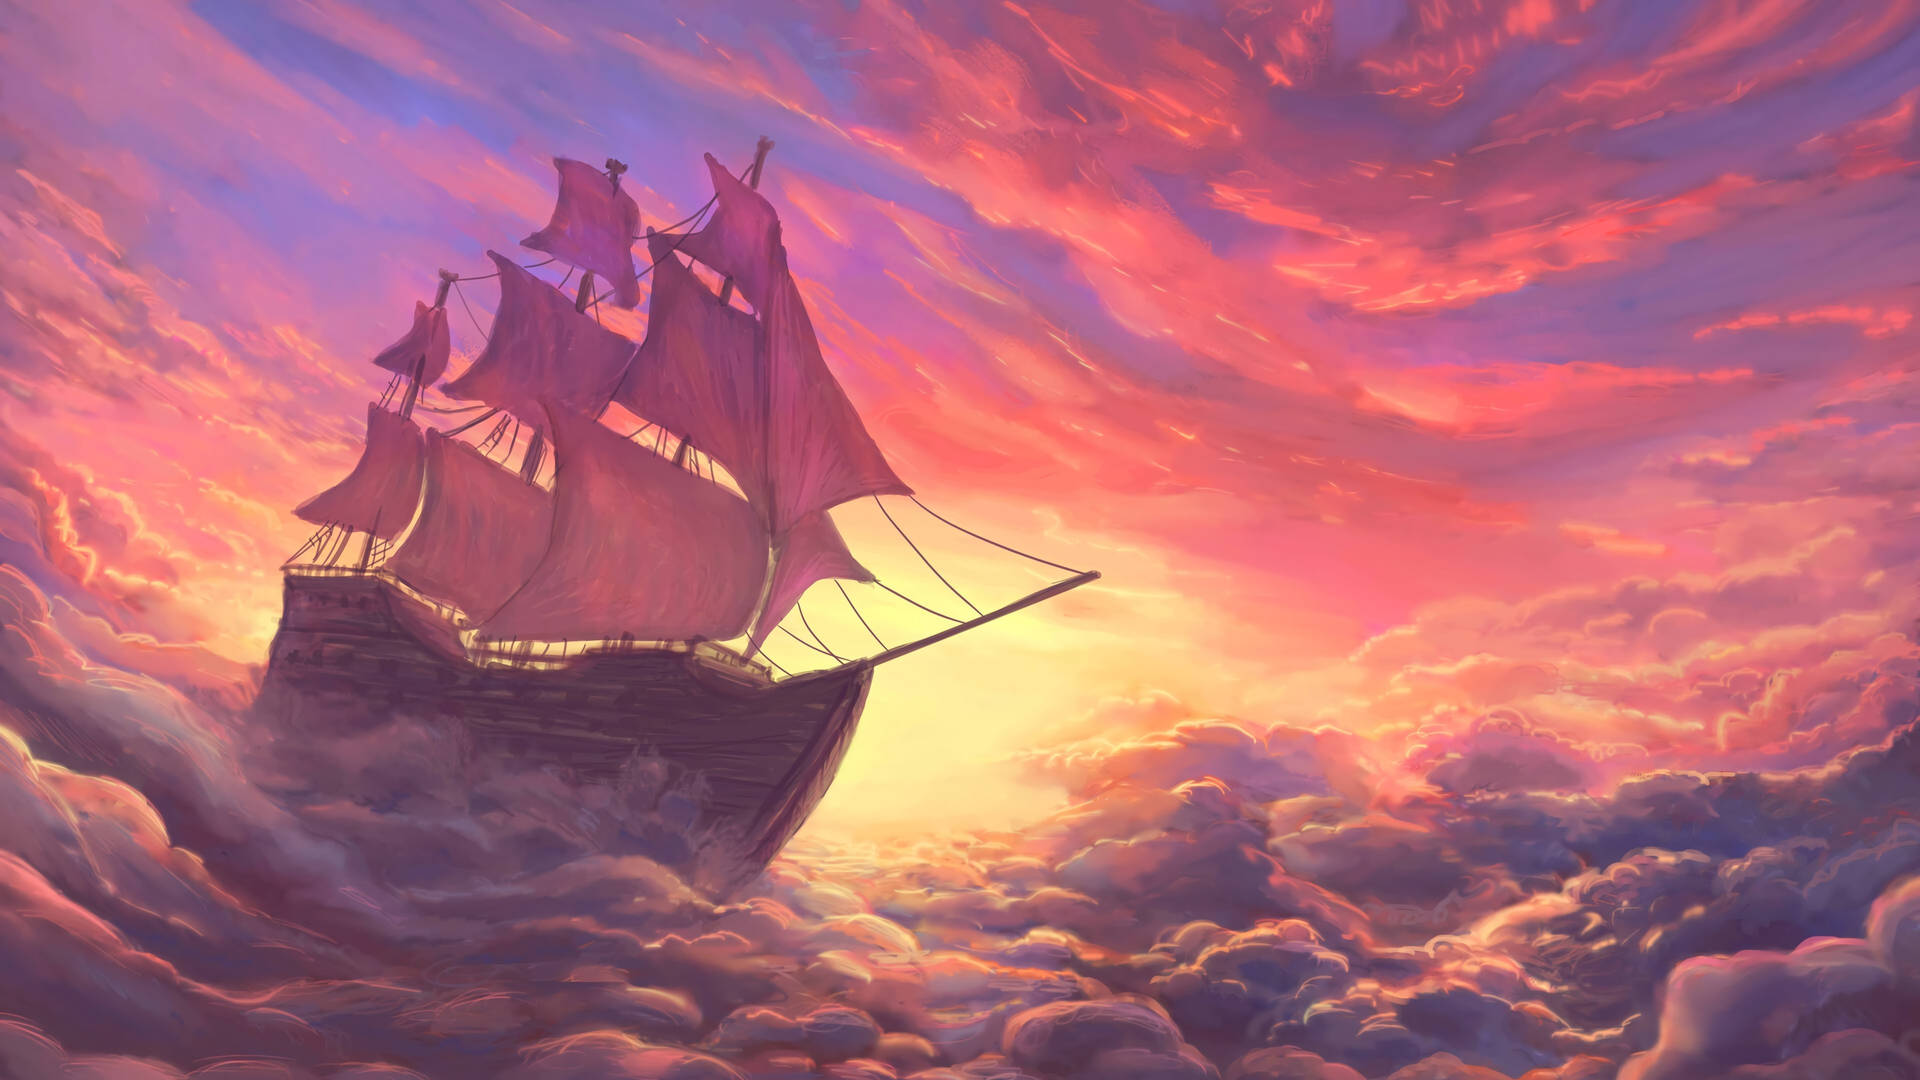 Pink Aesthetic Pirate Ship Background